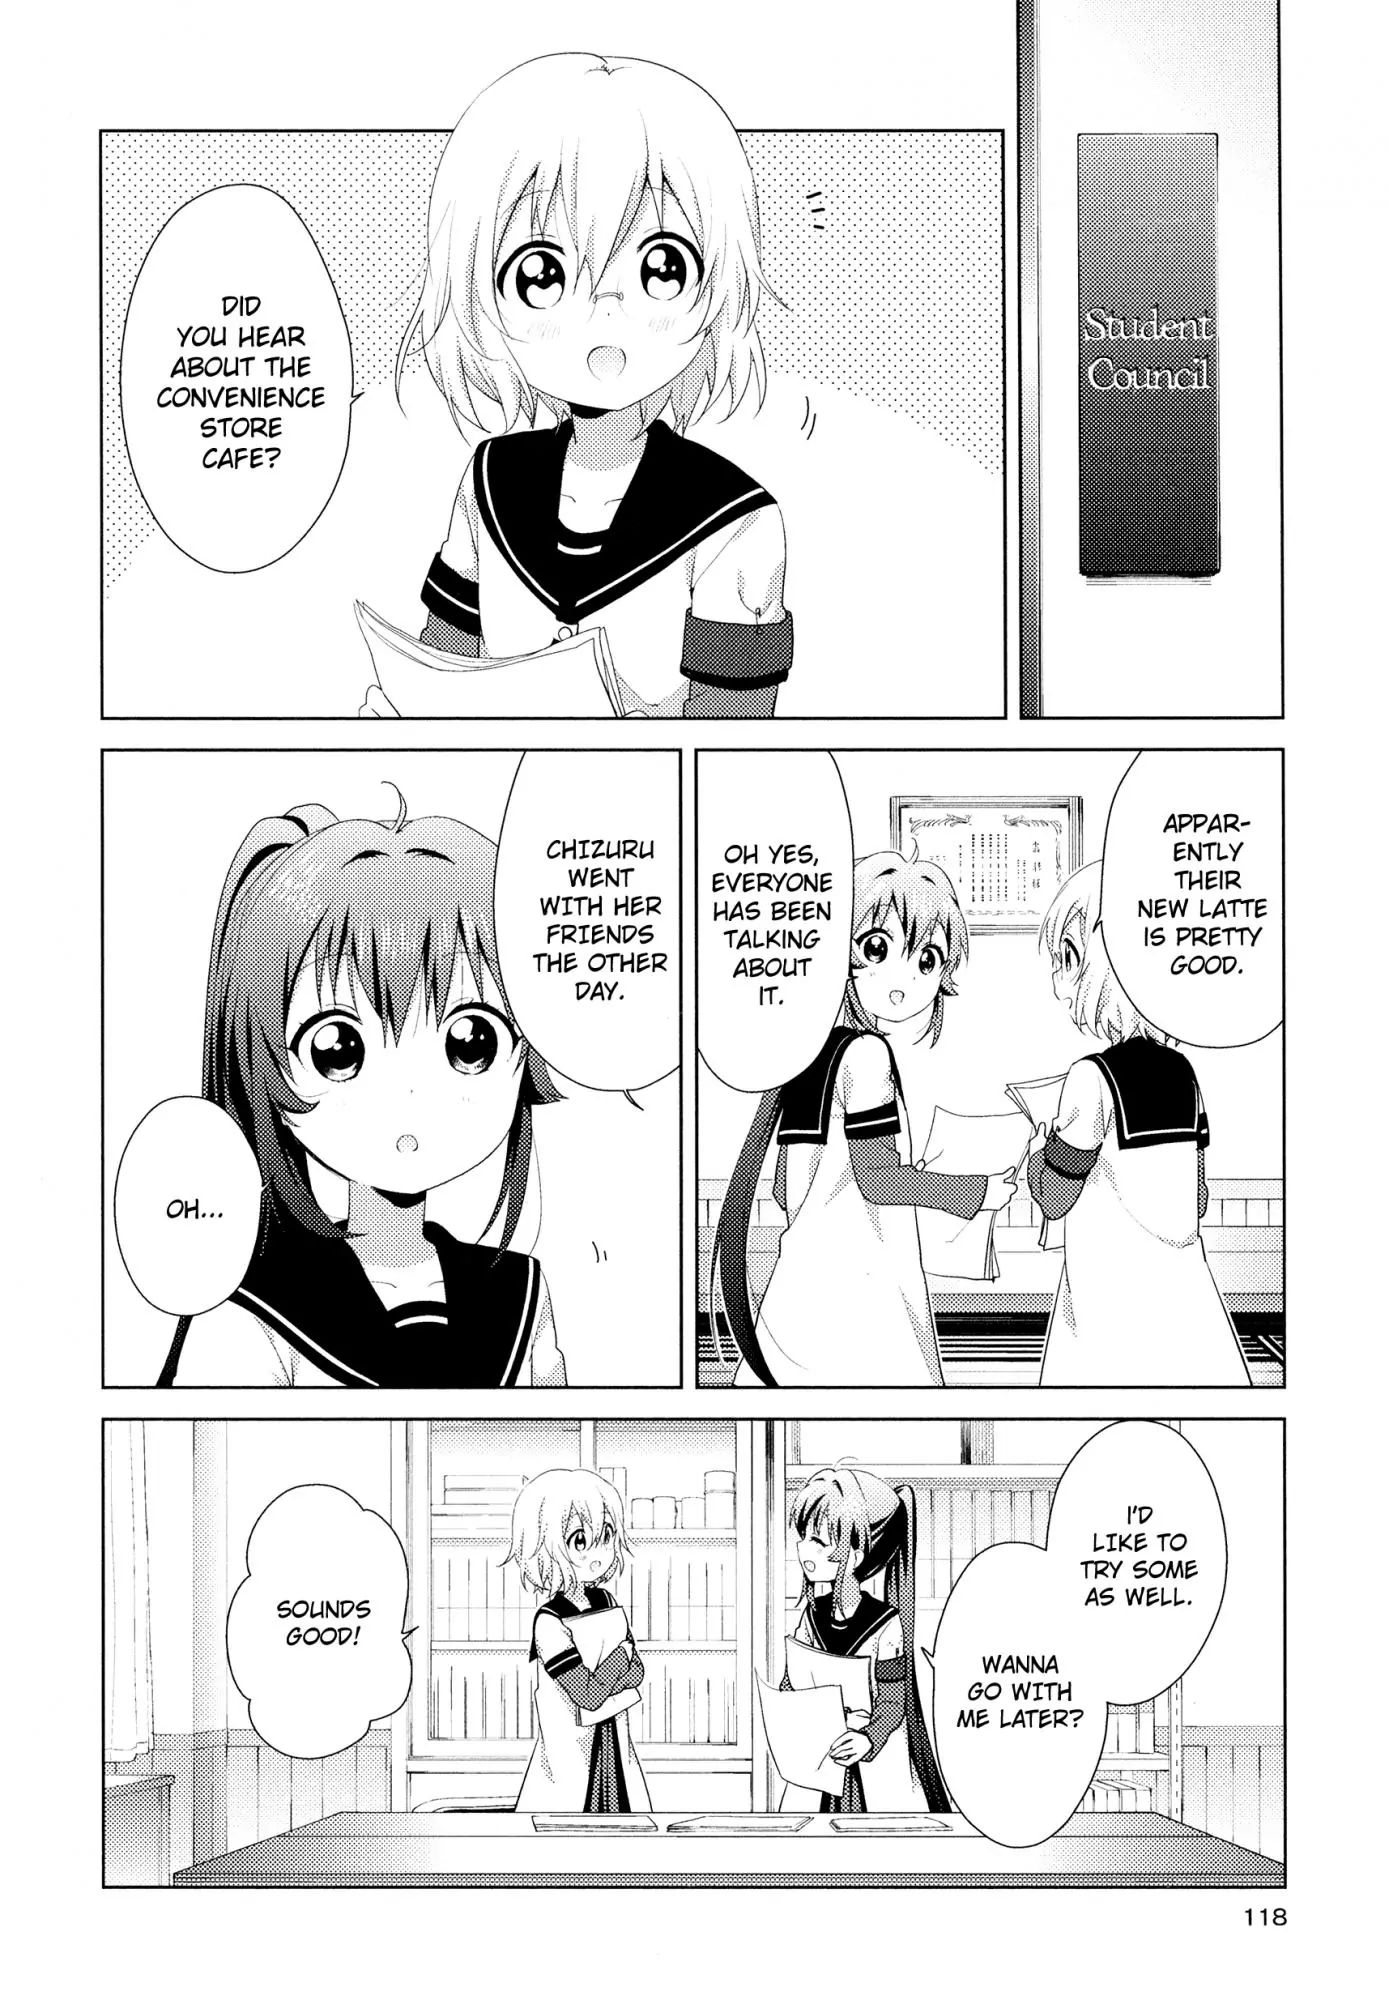 Yuru Yuri Vol.14 Chapter 107: About That - Let's Think About It A Little More - Picture 2